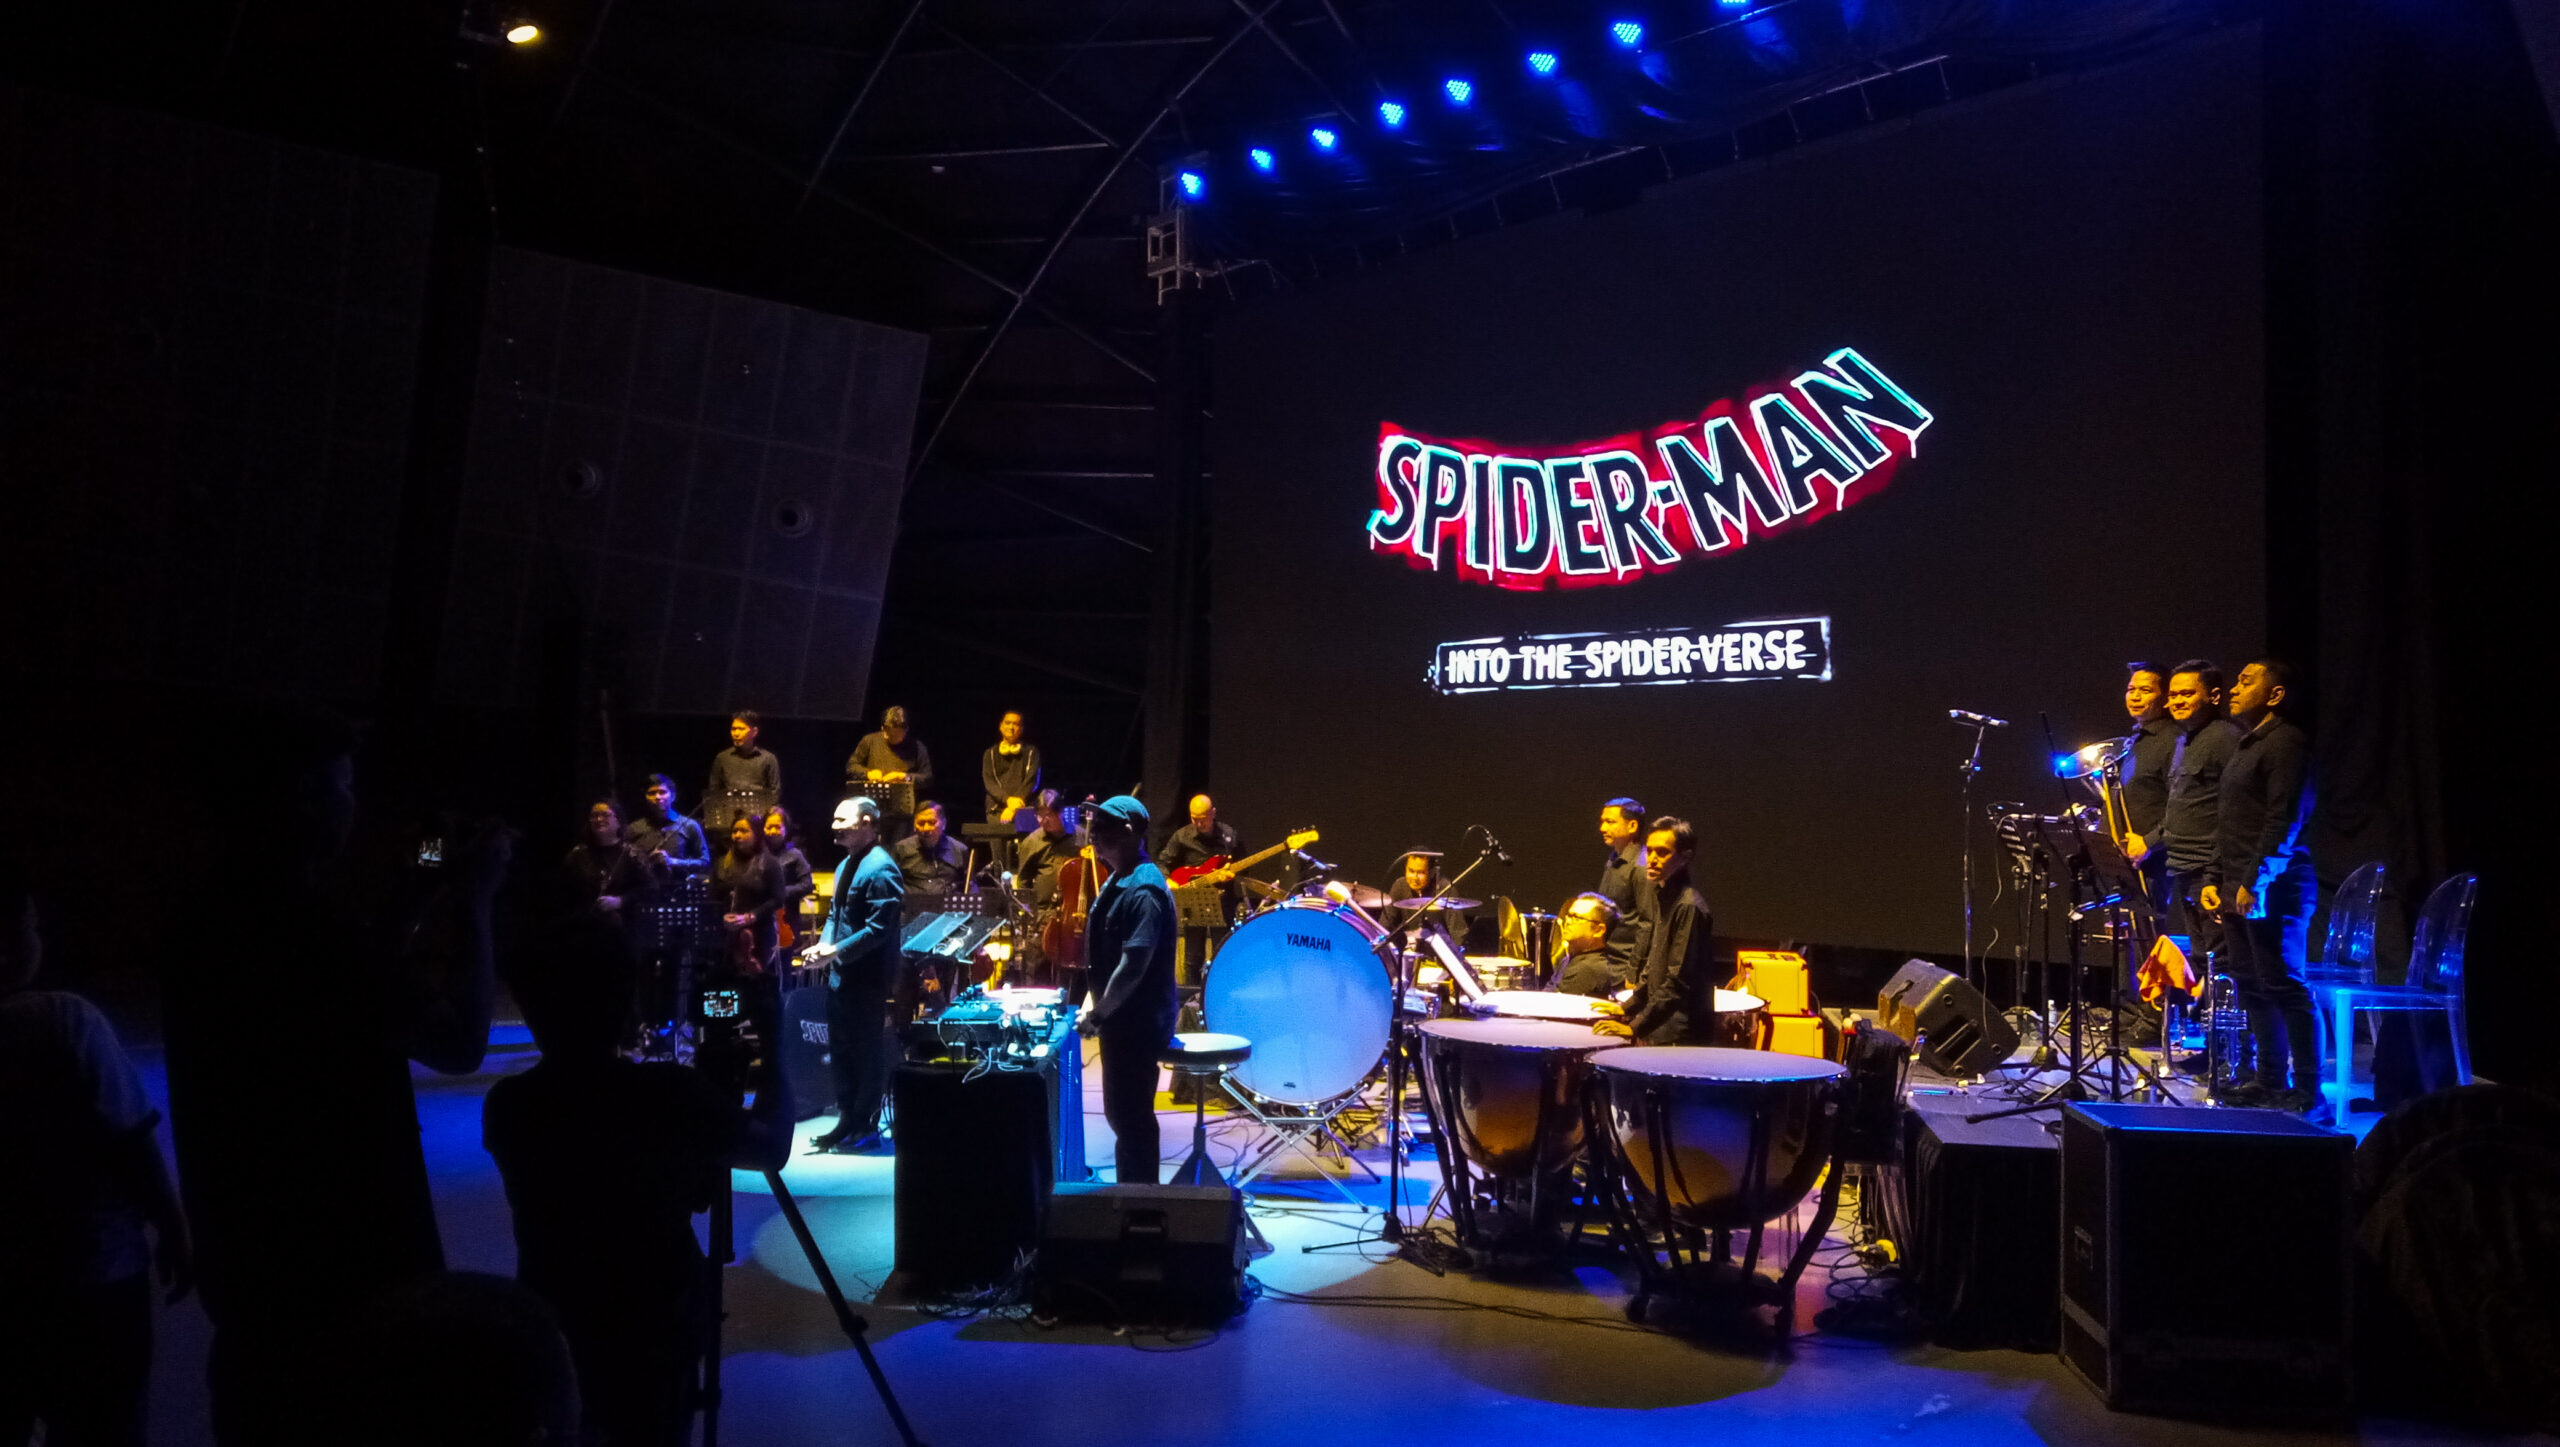 Spider-Man: Into the Spider-verse Live Concert Set for March